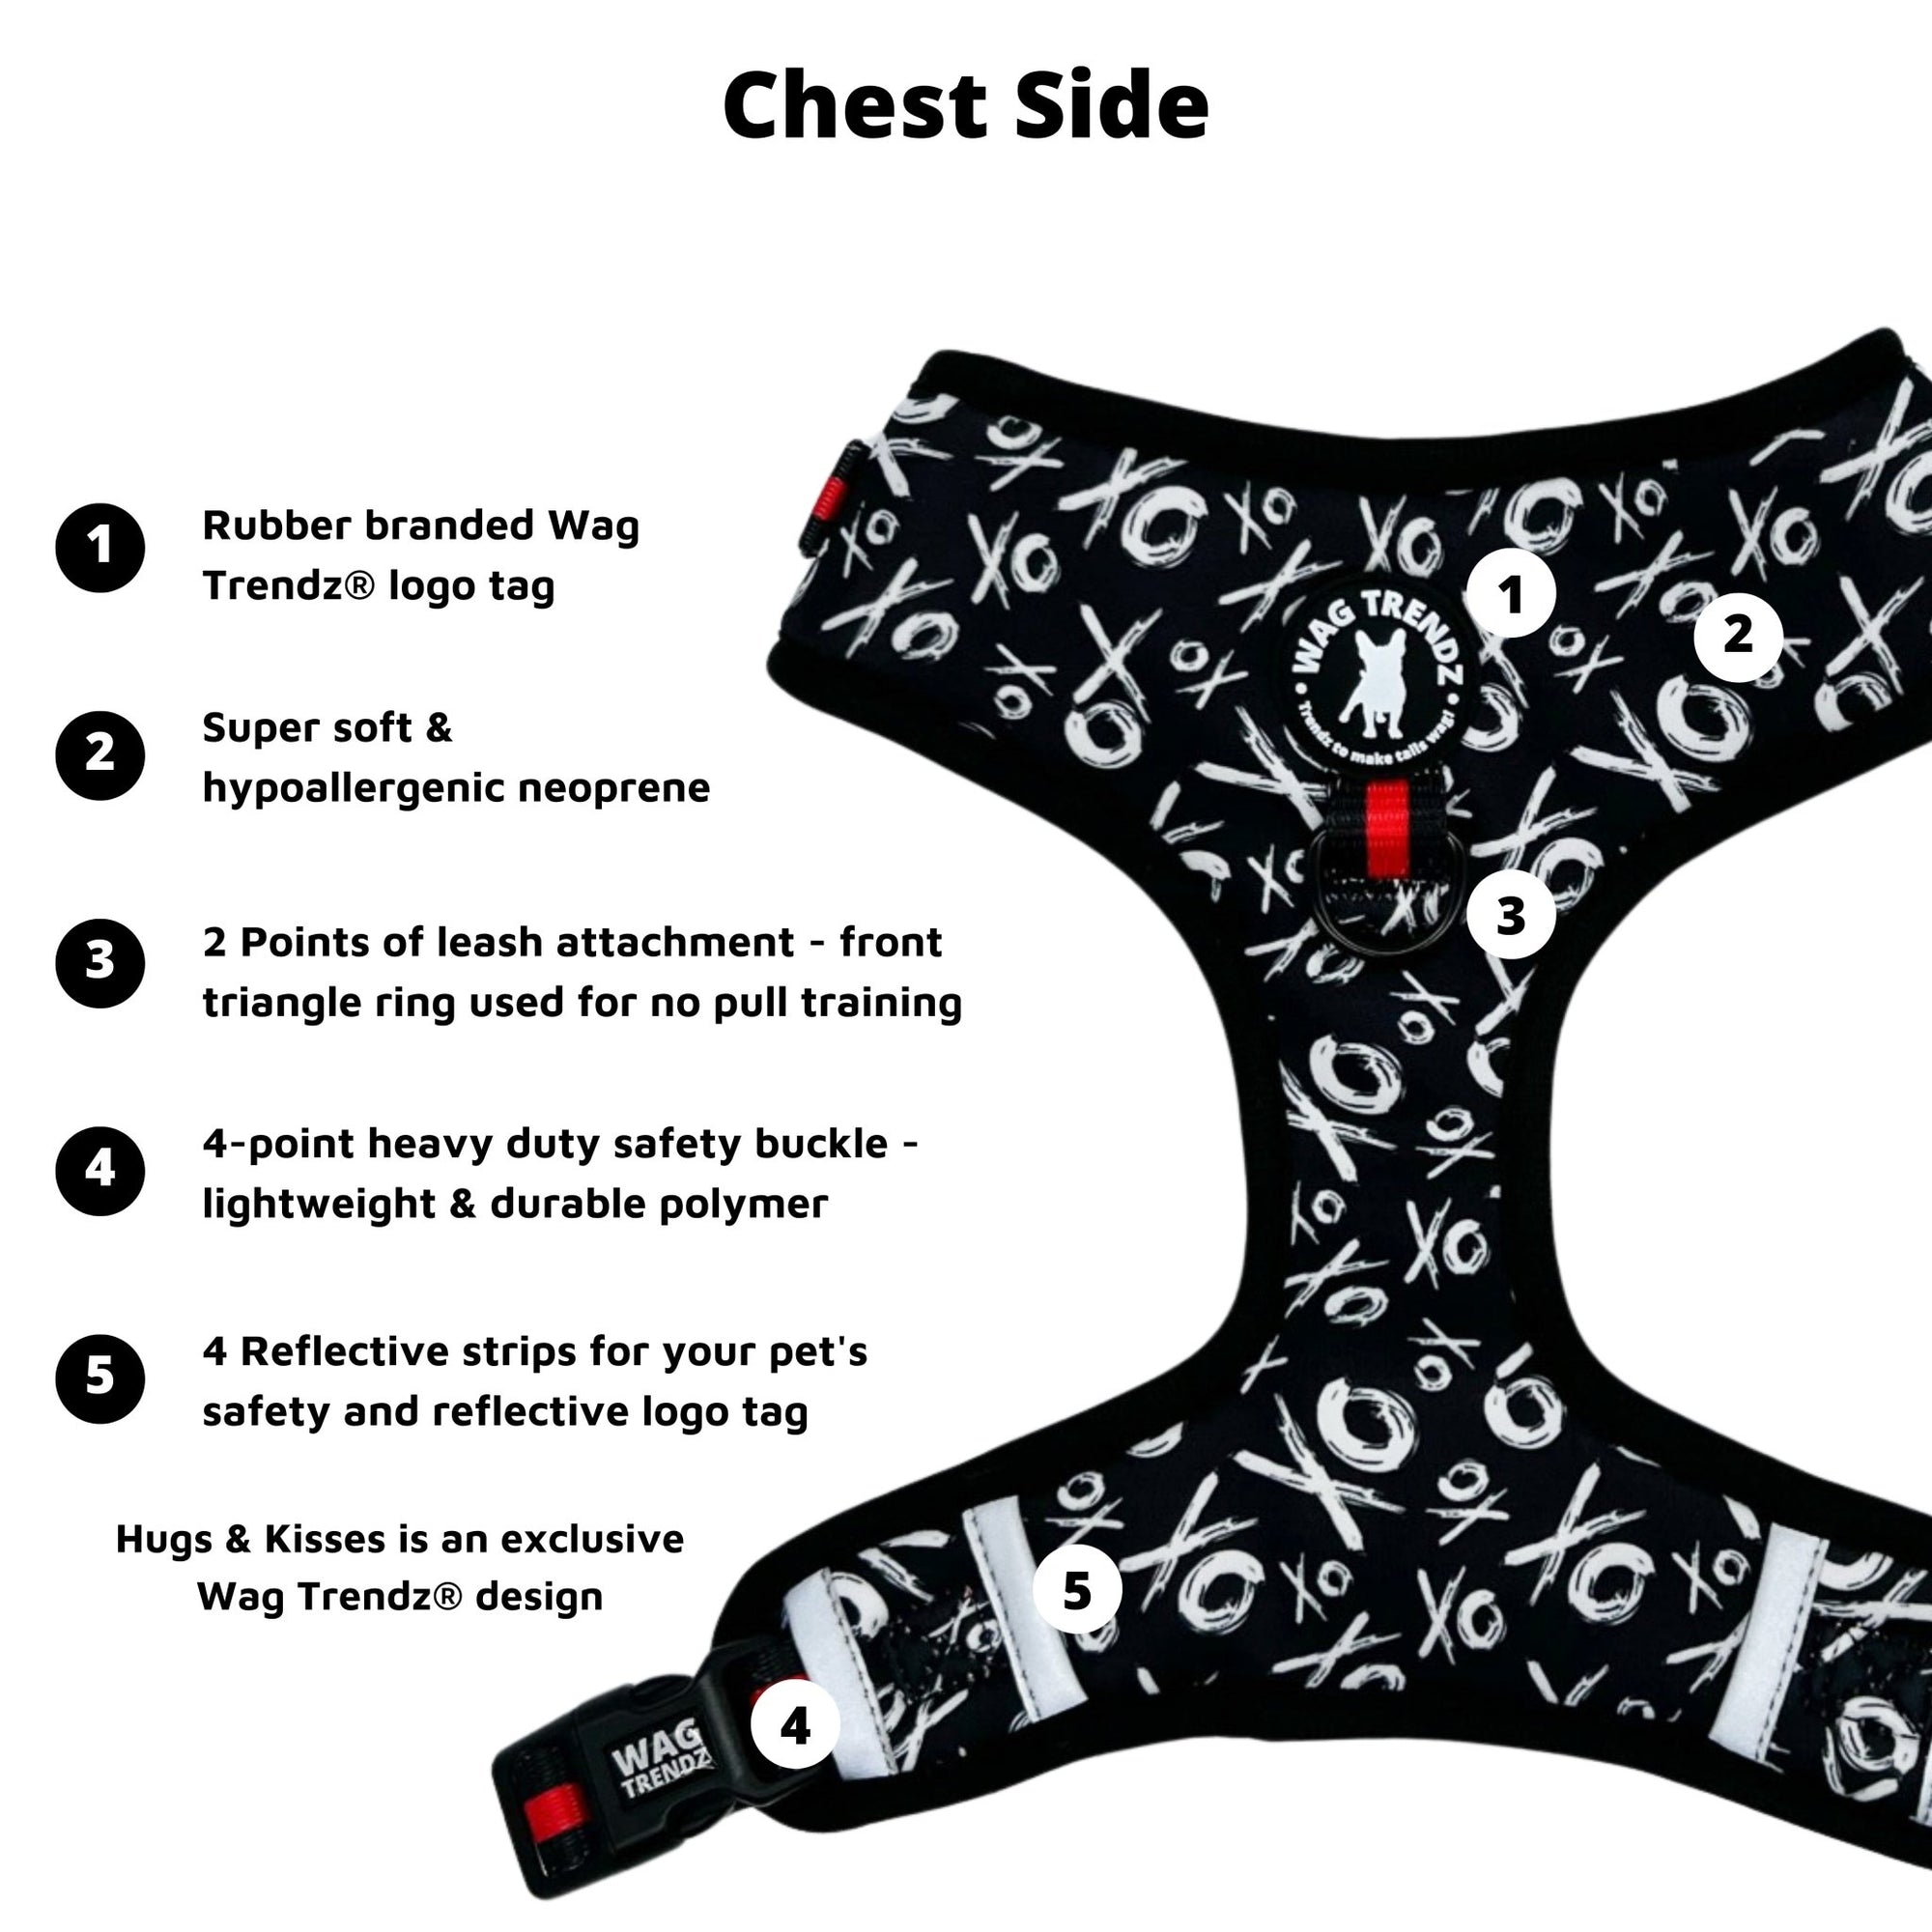 Dog Harness Vest - Adjustable - Front Clip - Dog Harness Vest in black and white XO&#39;s with bold red accents - product feature captions - front side - against solid white background - Wag Trendz